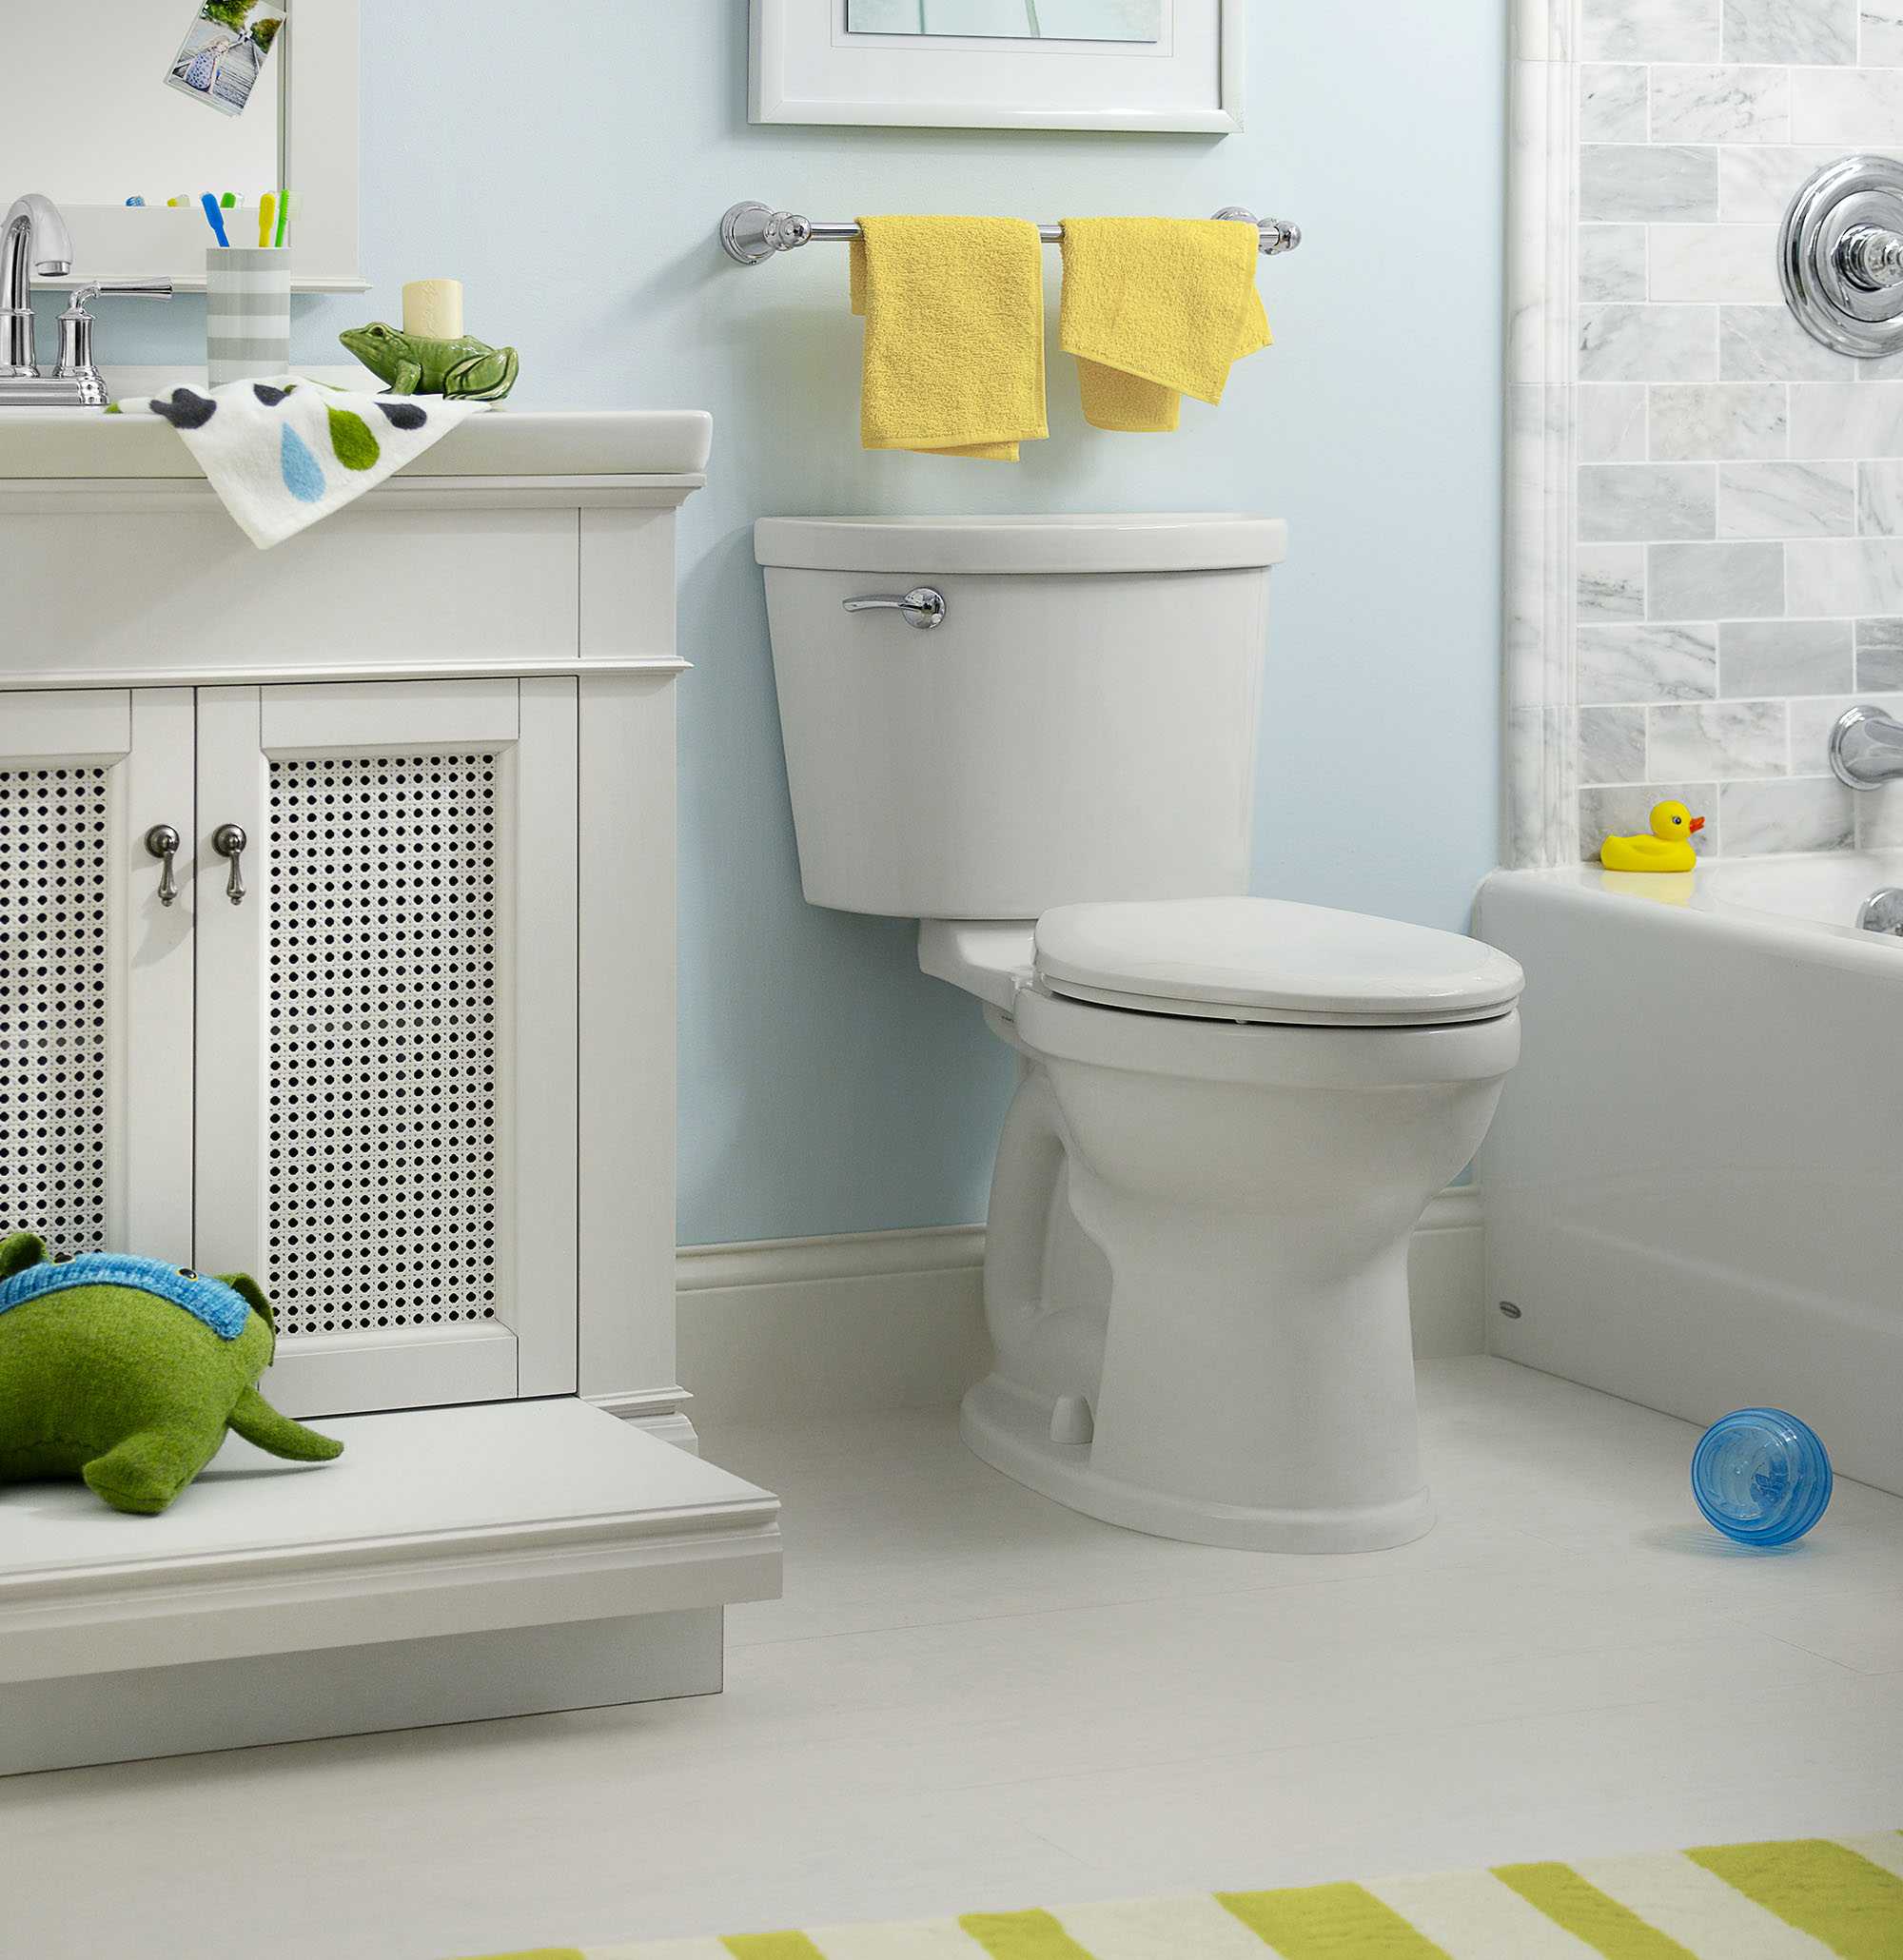 Champion PRO Two-Piece 1.28 gpf/4.8 Lpf Chair Height Elongated Toilet Less Seat